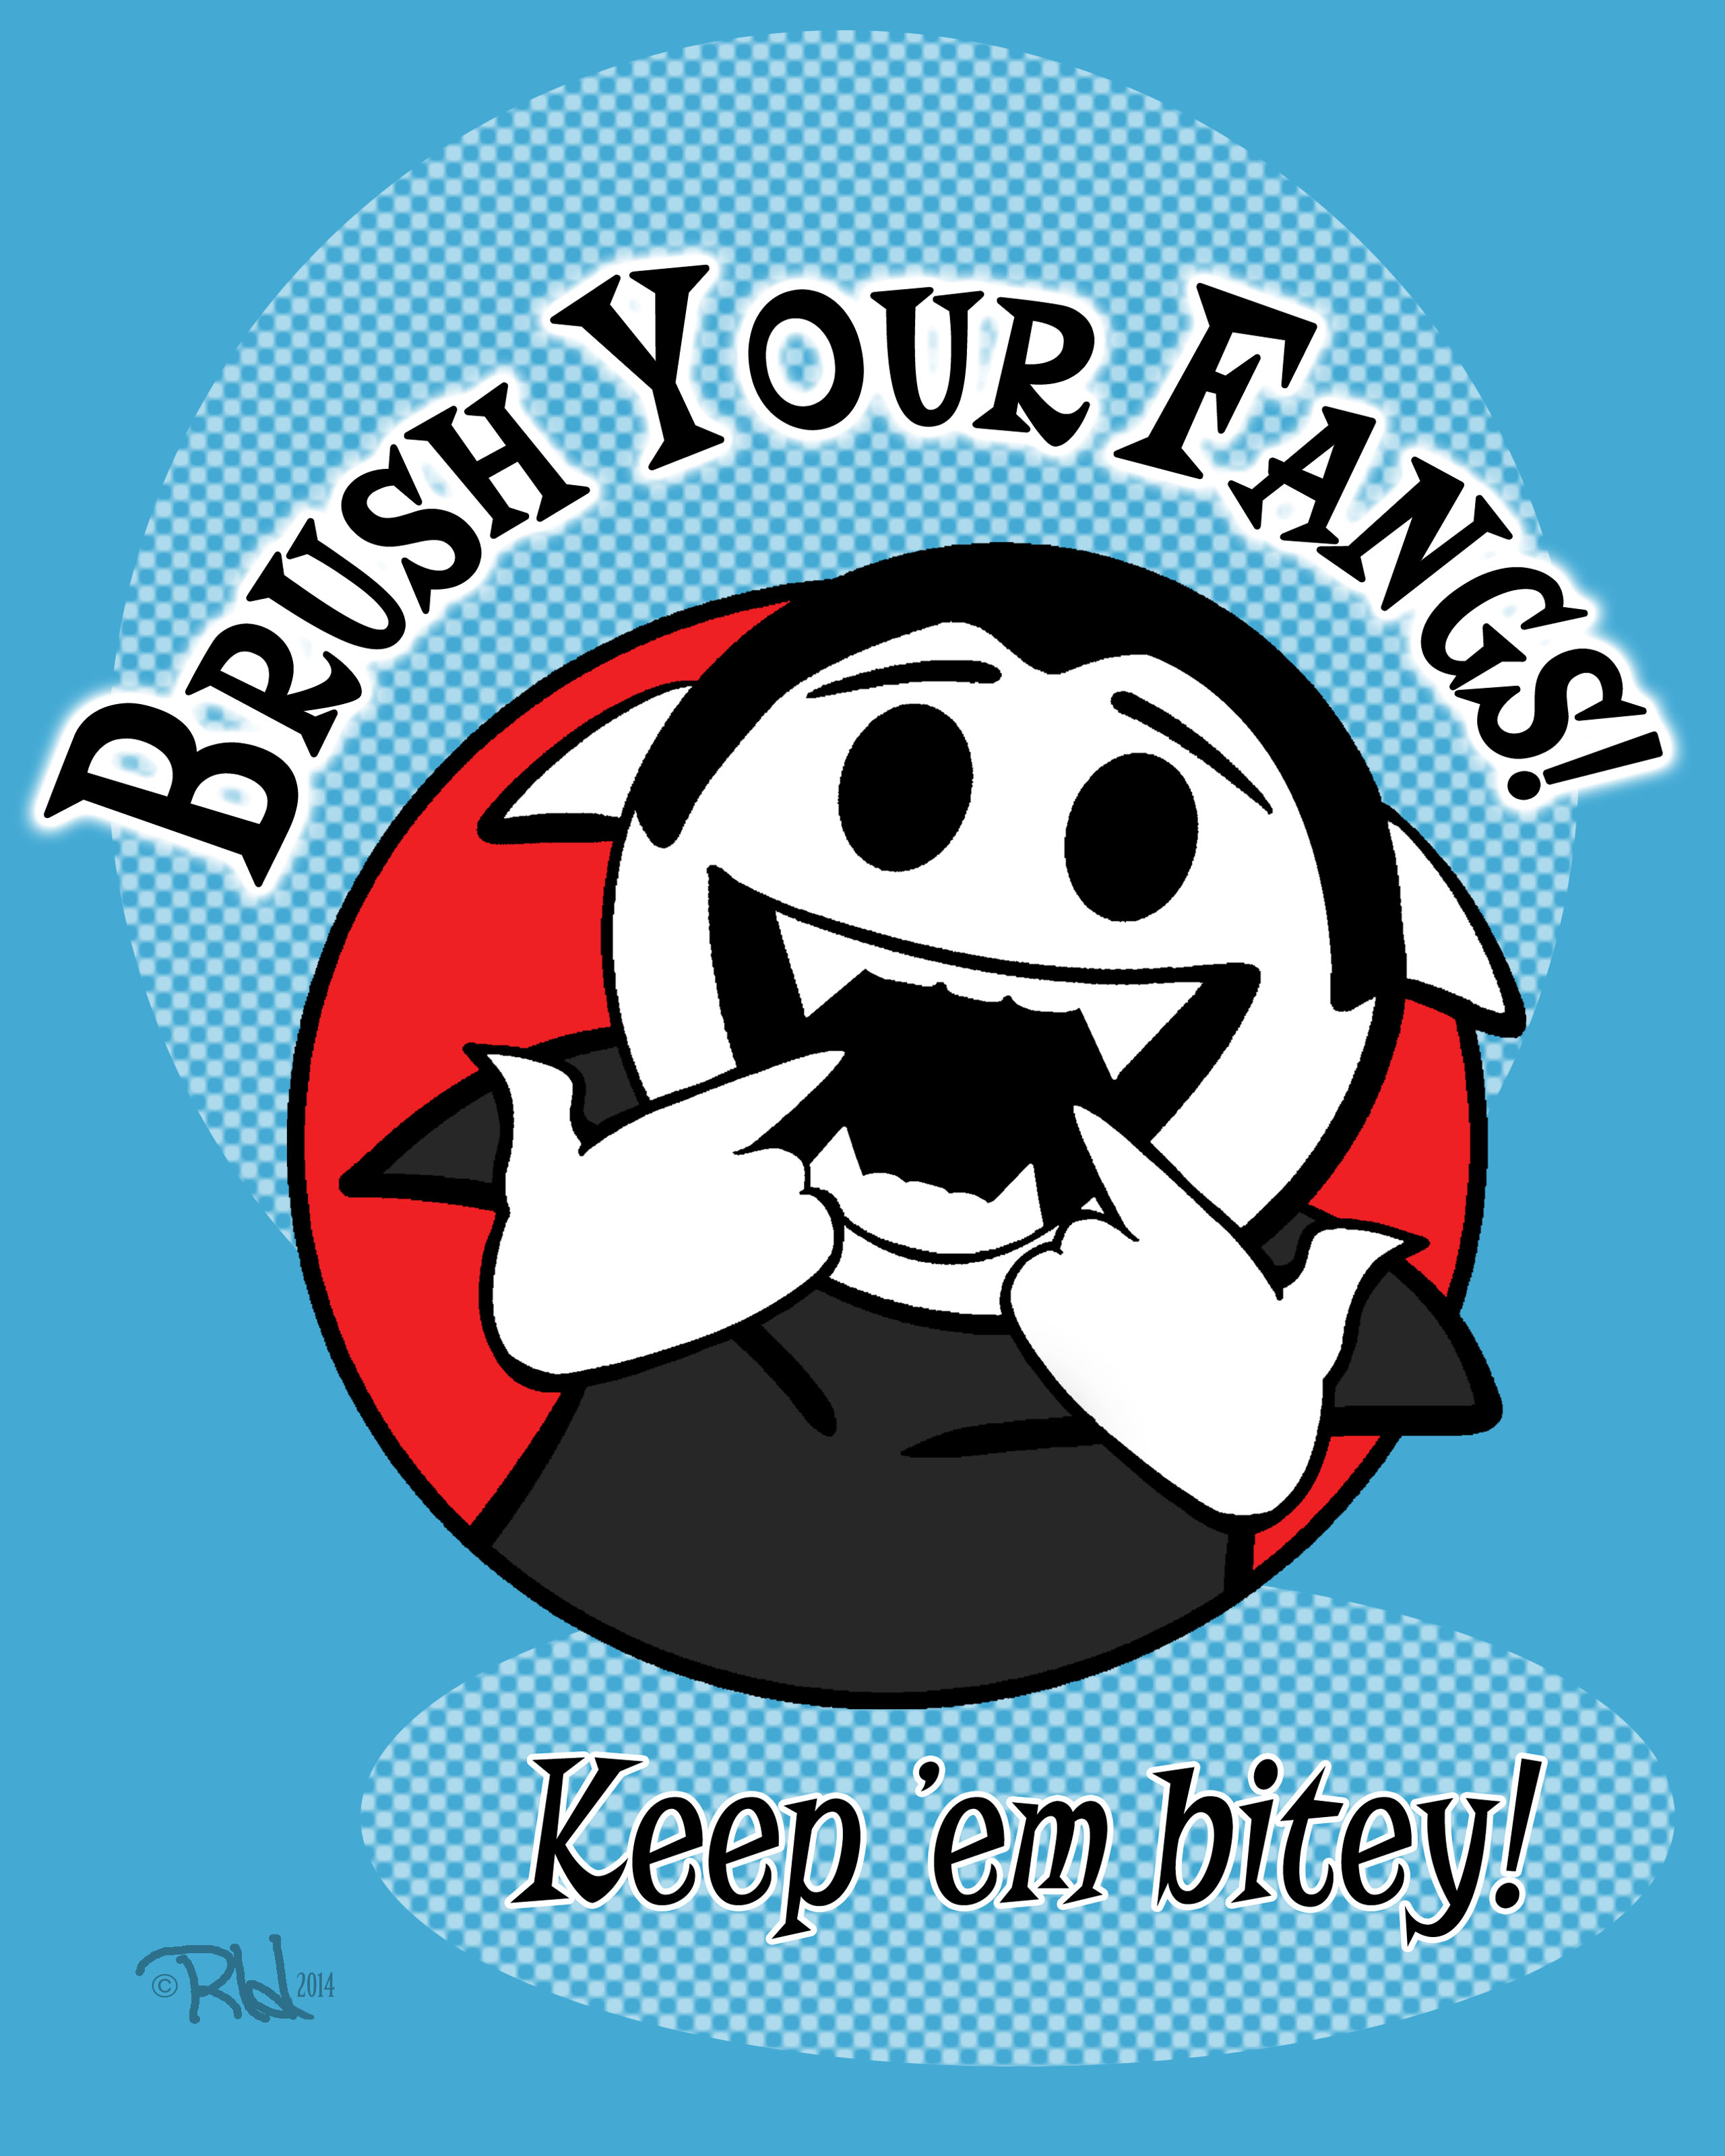 A Little Vampire cheerfully points at his fangs. The caption reads “Brush your fangs! Keep ‘em bitey!